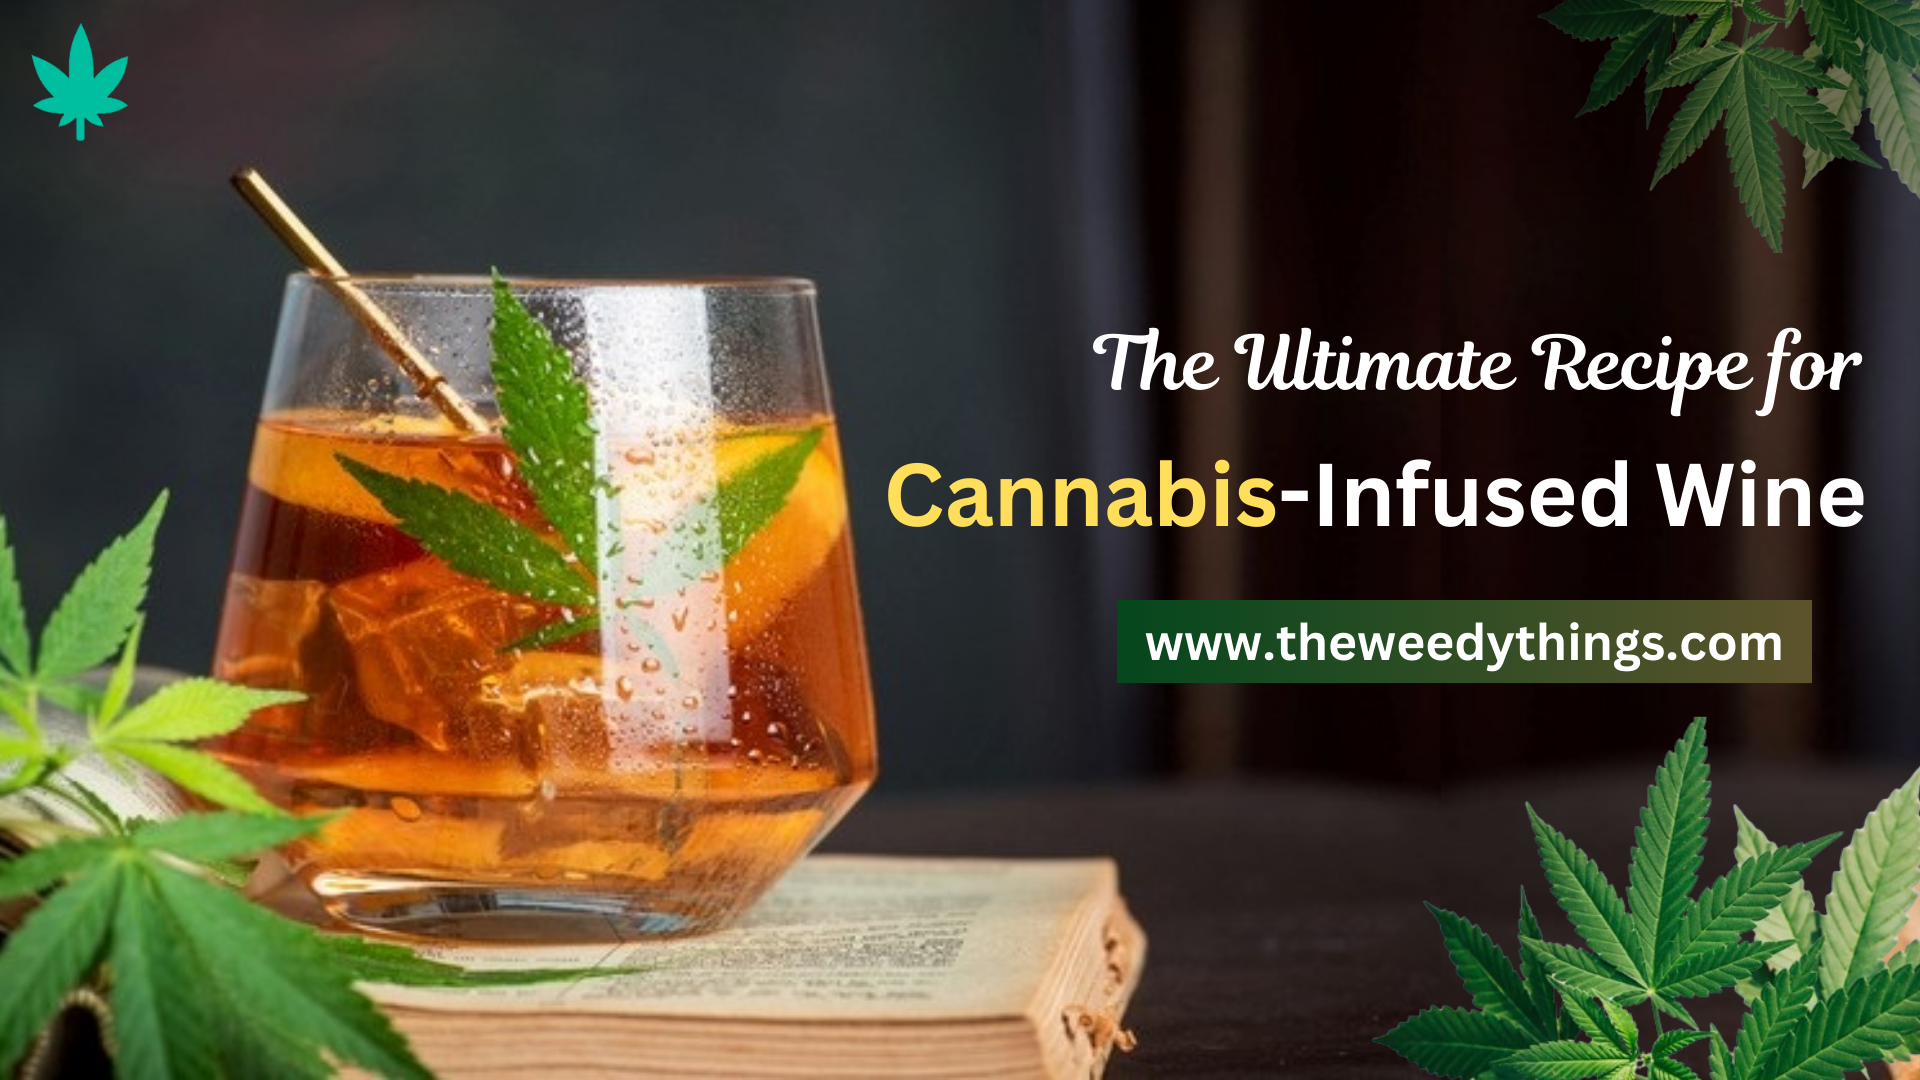 The Ultimate Recipe for Cannabis-Infused Wine